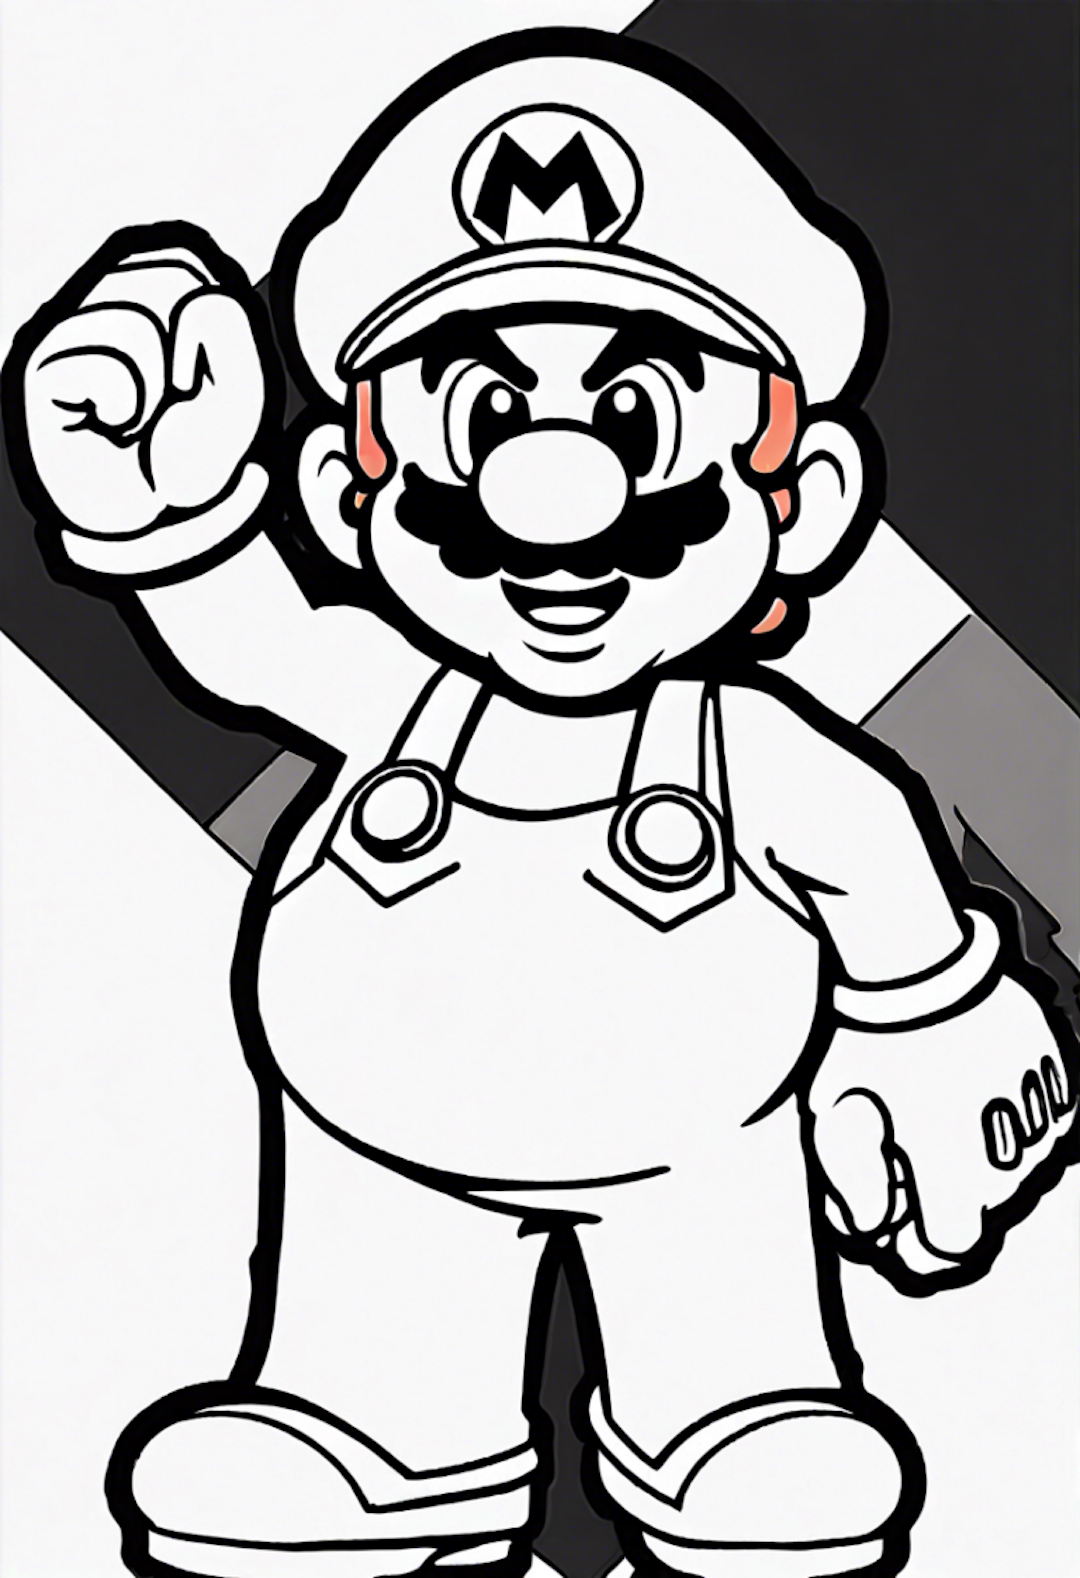 Mario And Luigi coloring pages